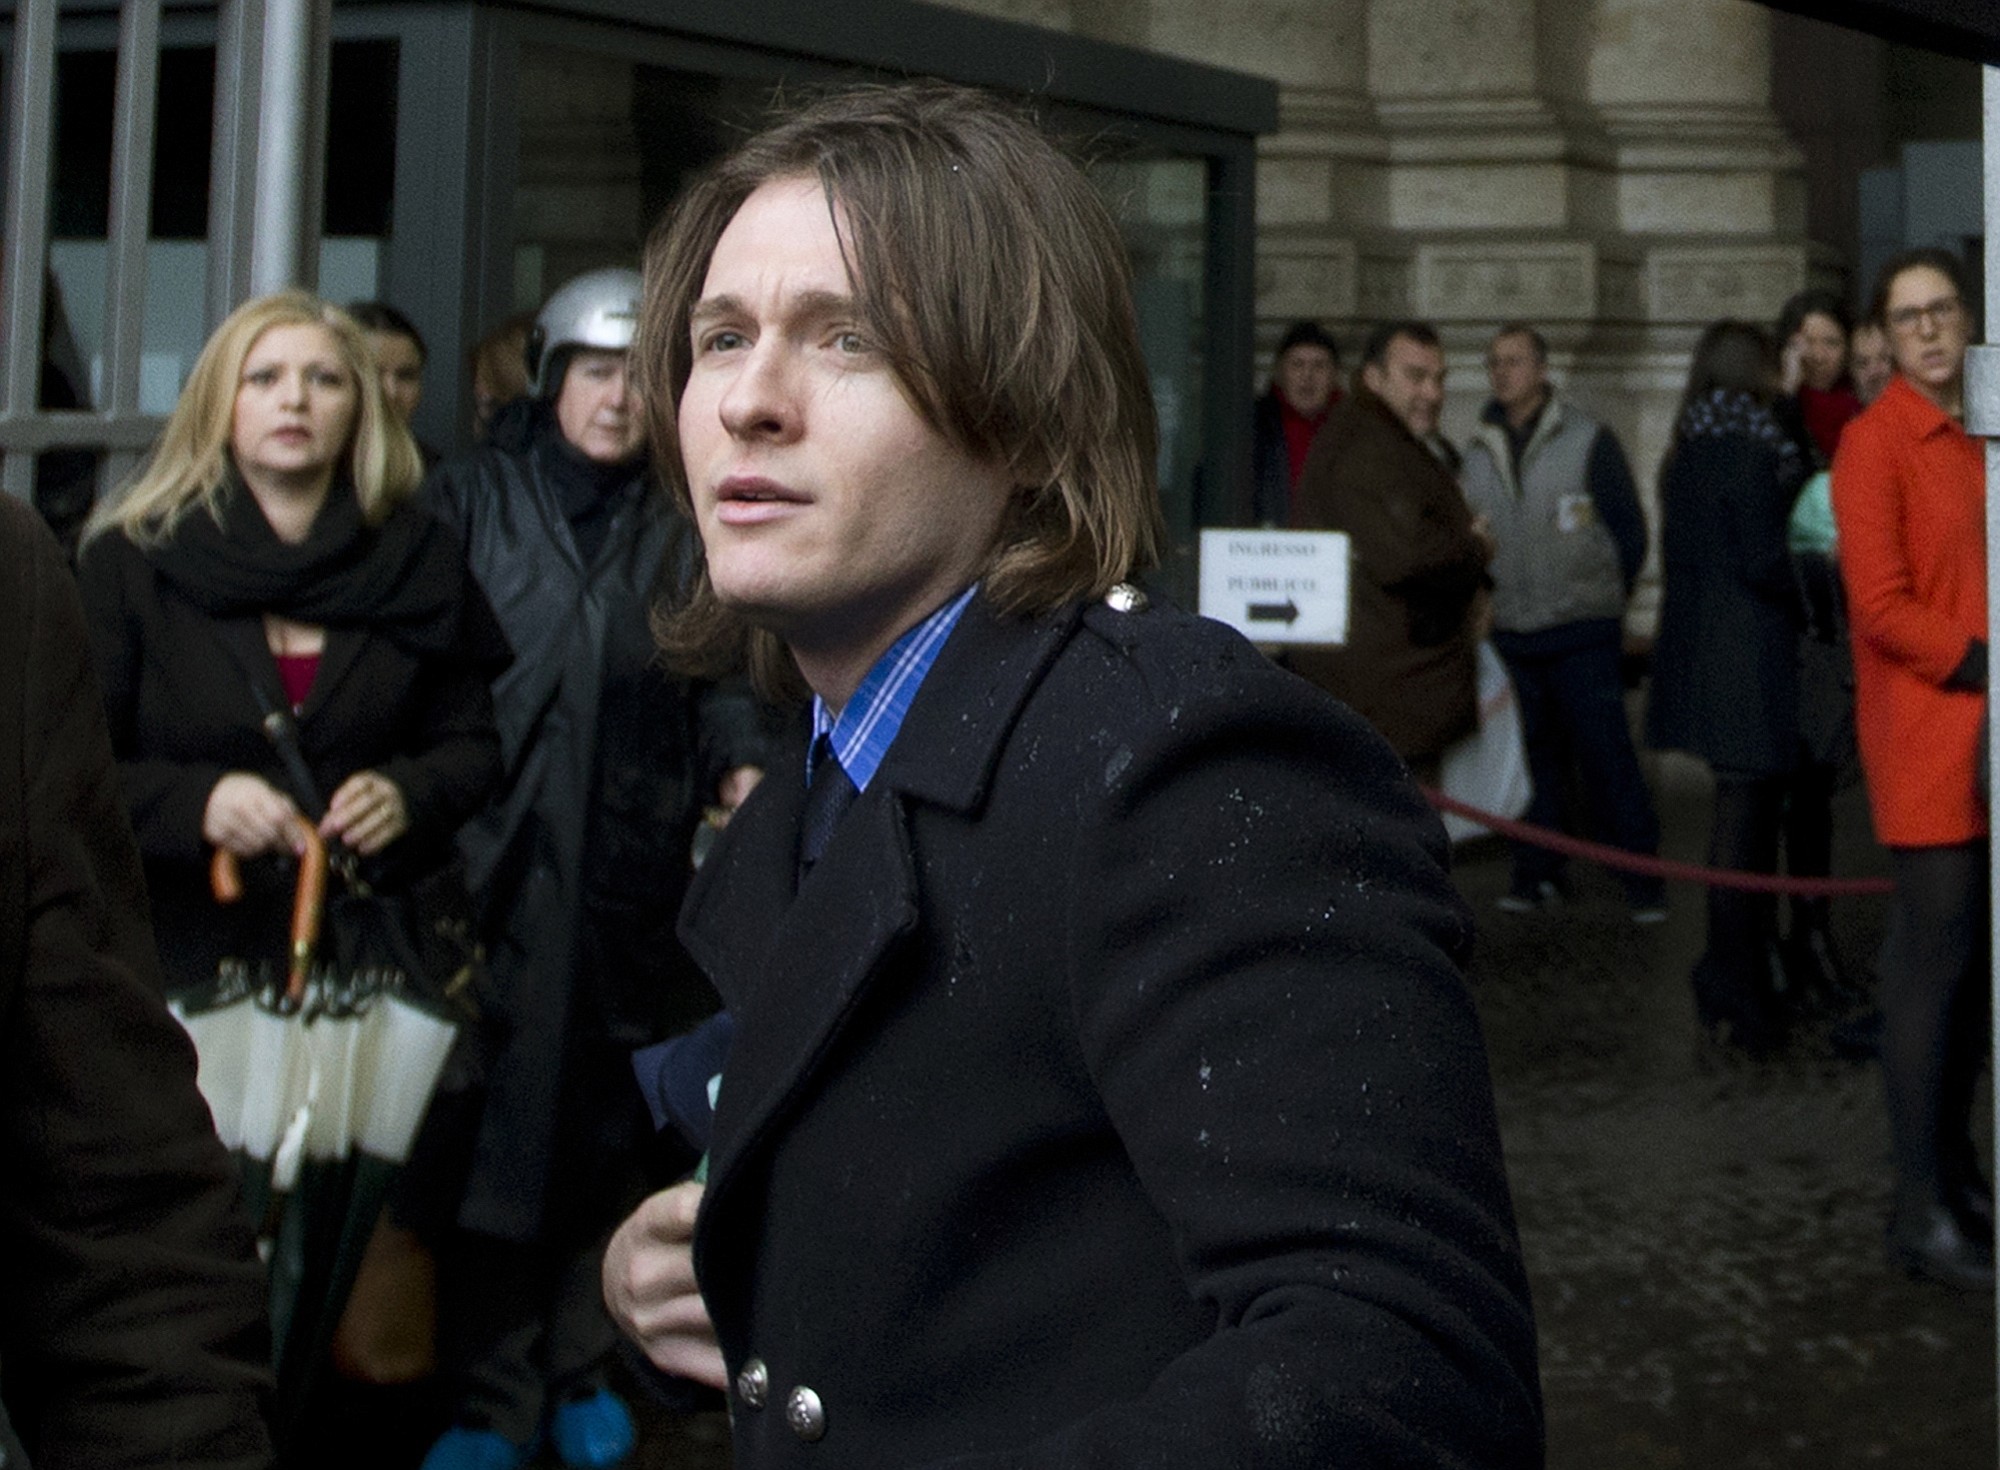 Raffaele Sollecito, the ex-boyfriend of Amanda Knox, arrives at Italy's highest court building in Rome on Wednesday.